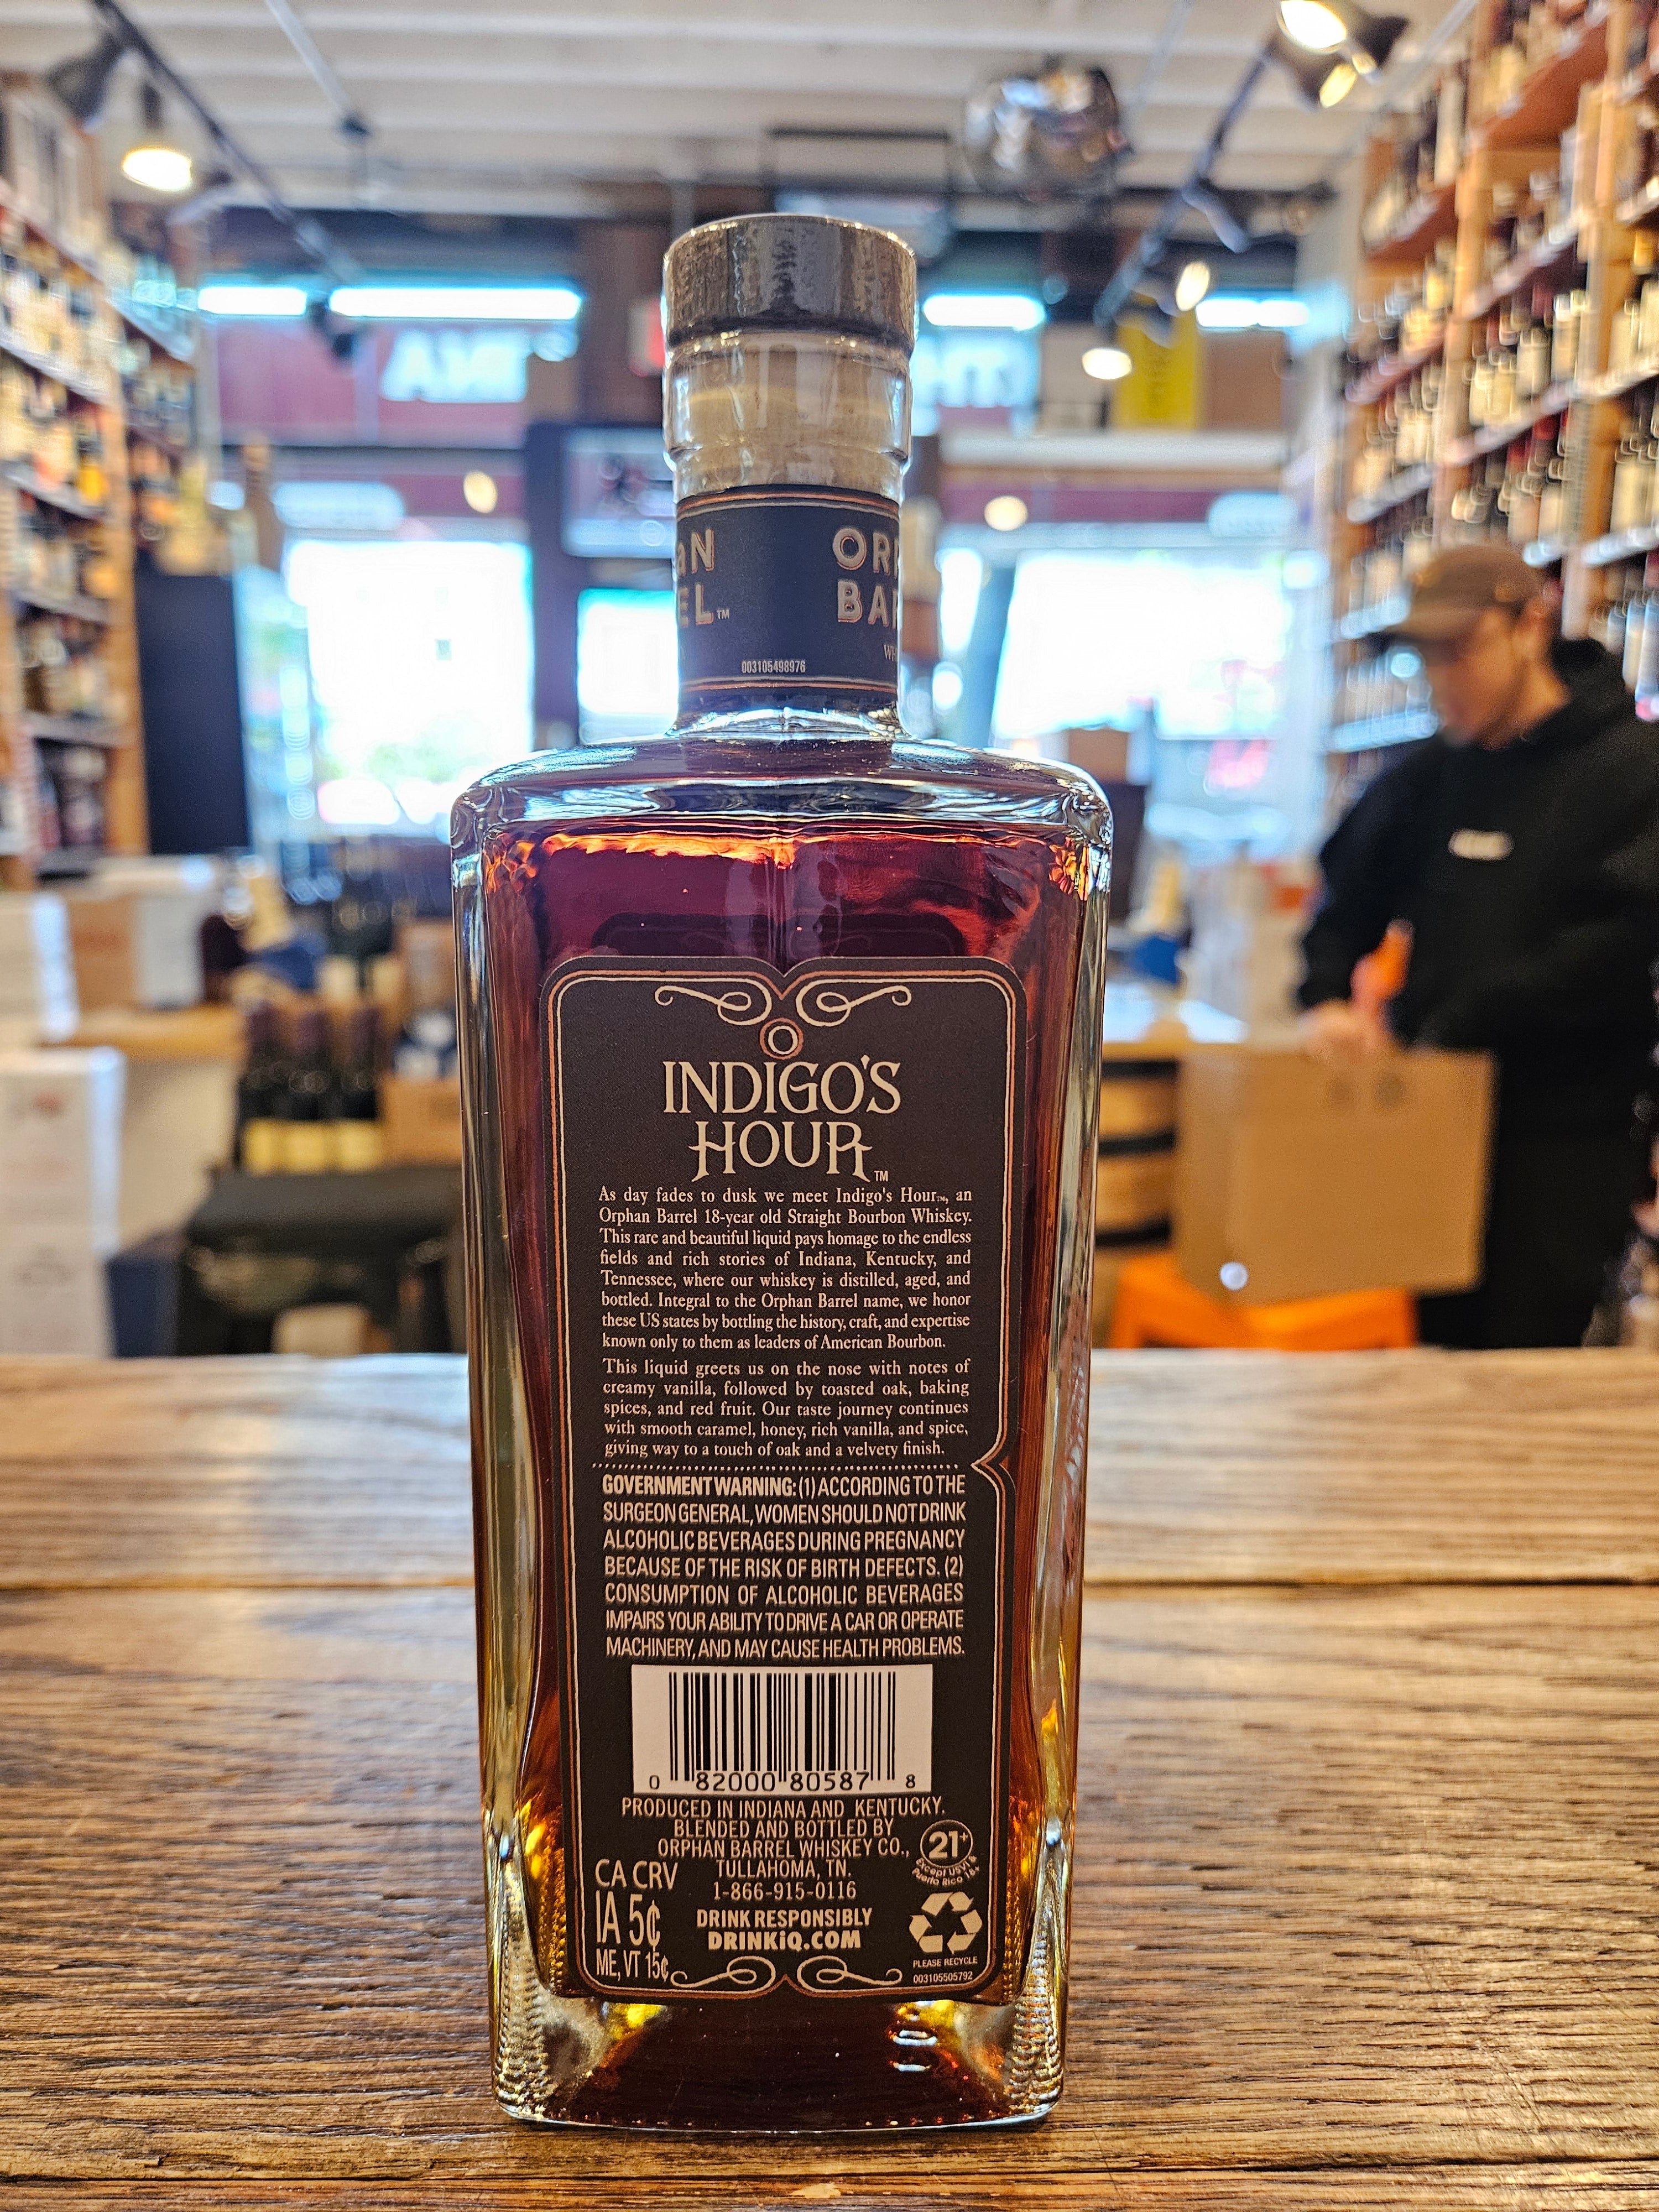 Orphan Barrel Indigo's Hour 750mL the side of a squared short clear glass bottle with a black label and a wooden top